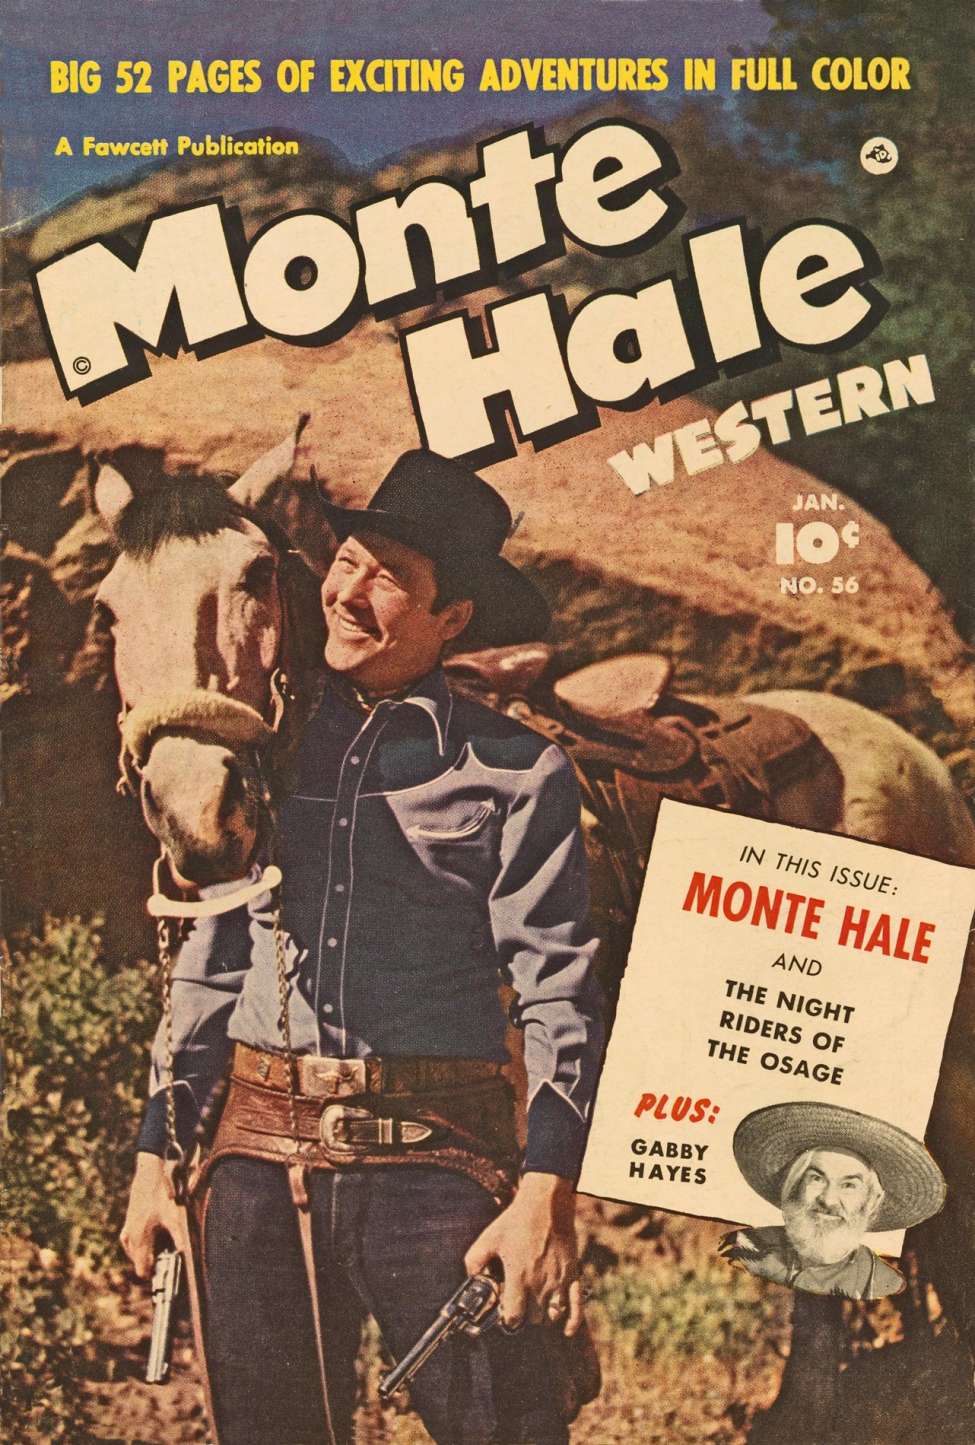 Book Cover For Monte Hale Western 56 - Version 2